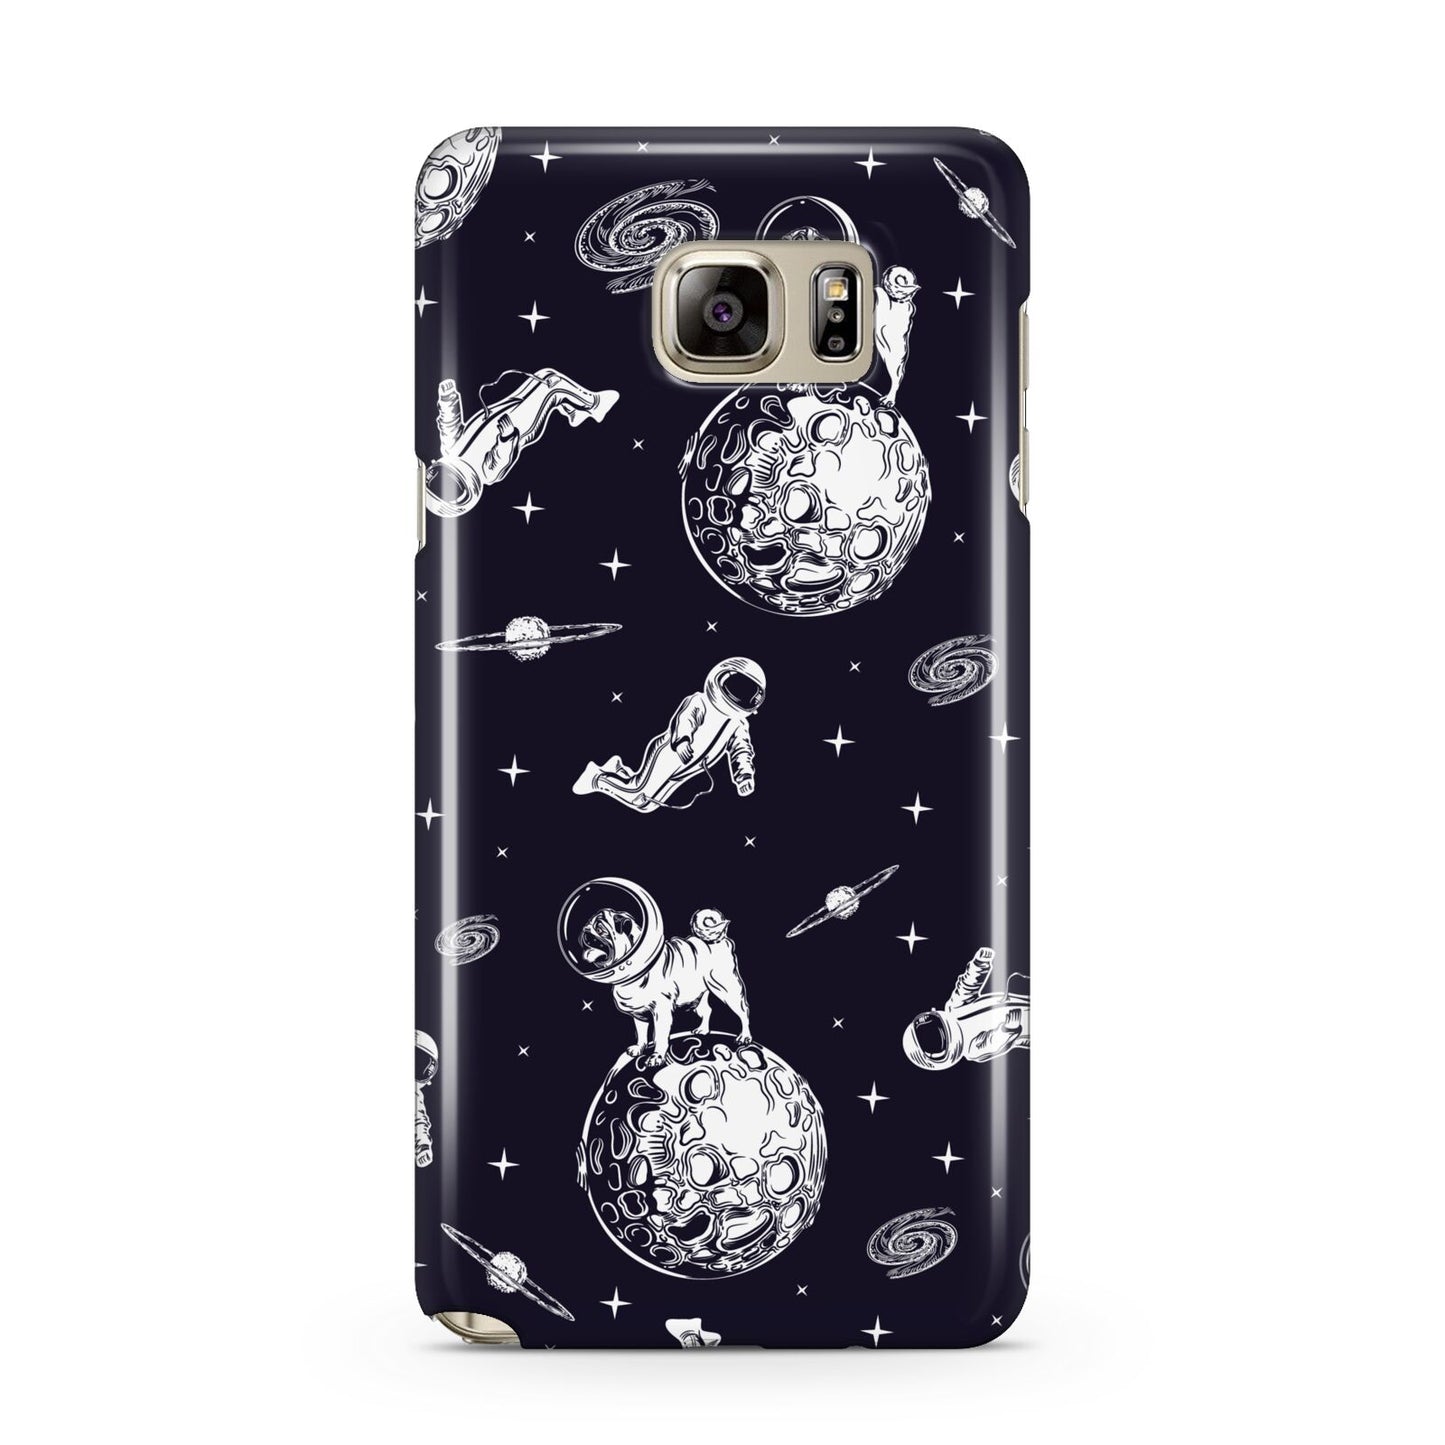 Pug in Space Samsung Galaxy Note 5 Case